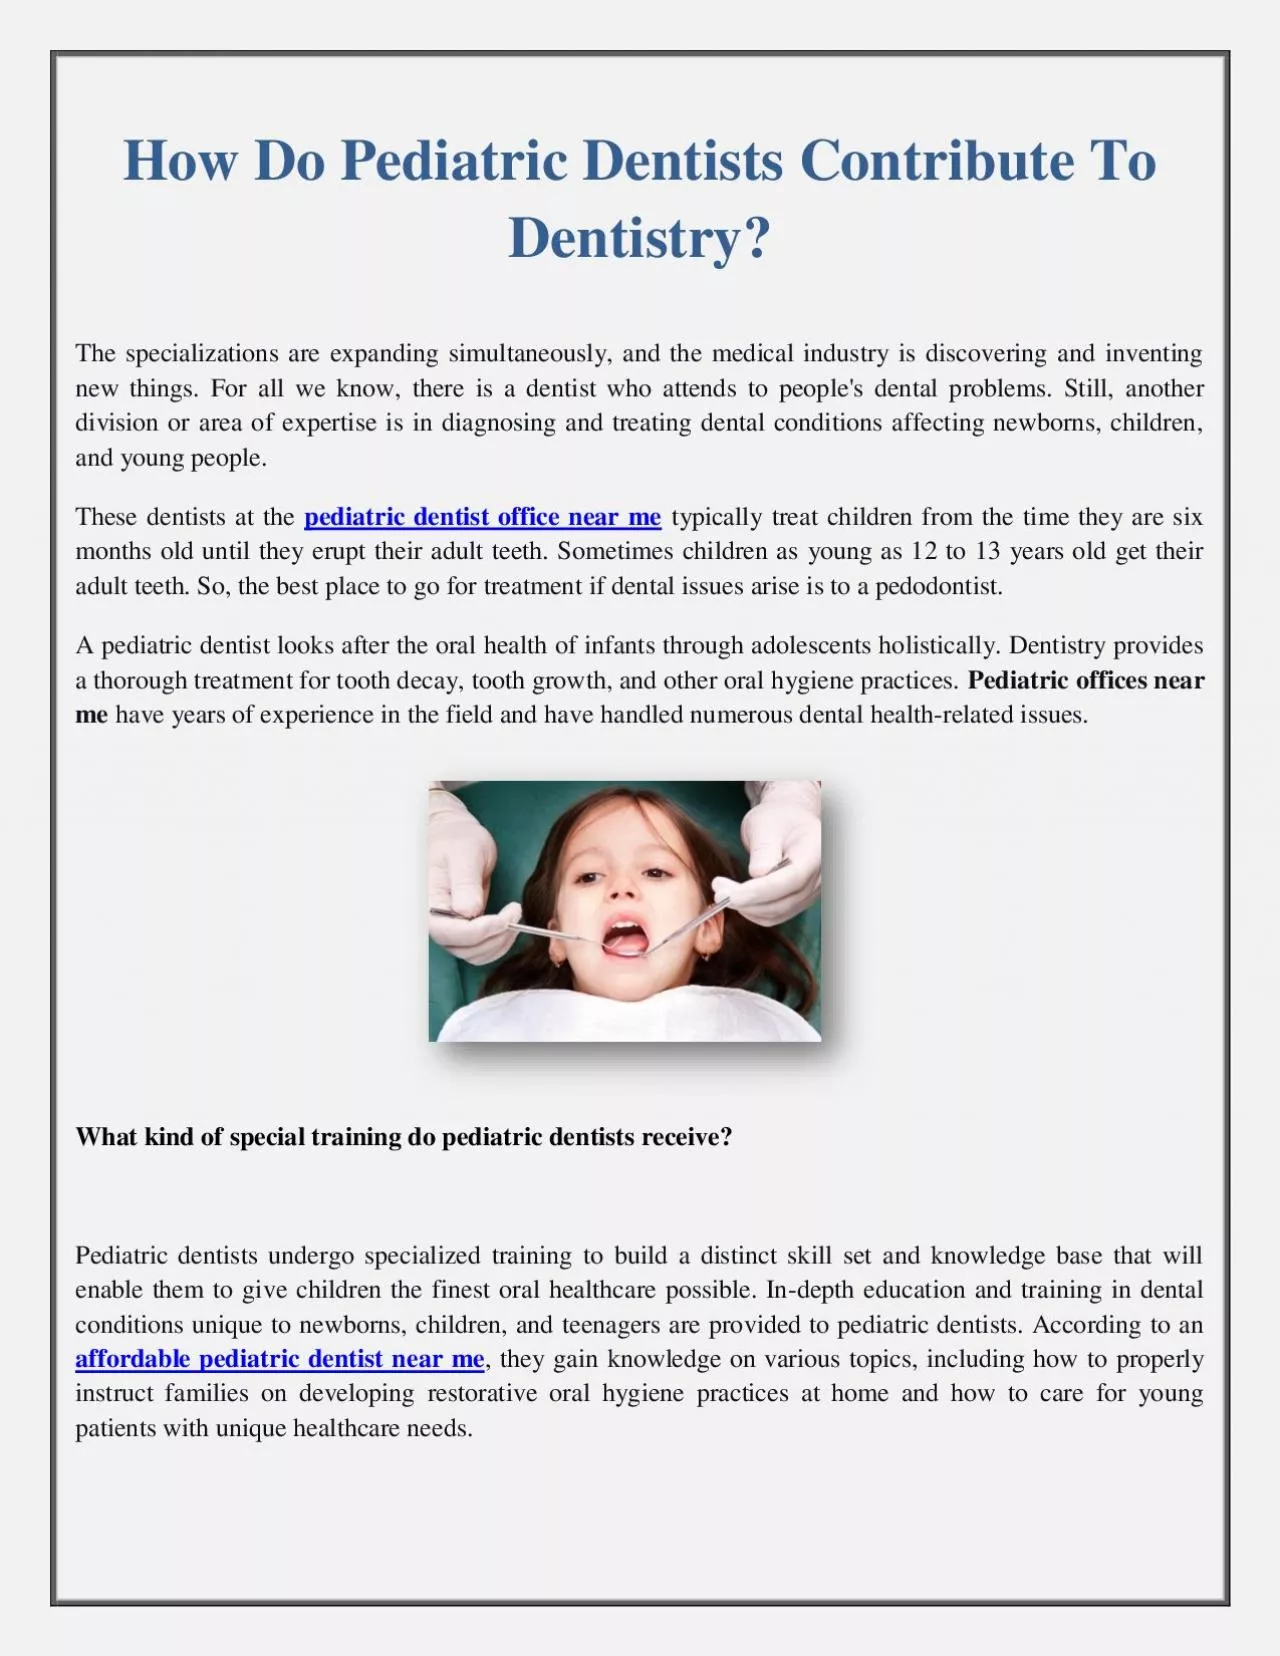 How Do Pediatric Dentists Contribute To Dentistry?